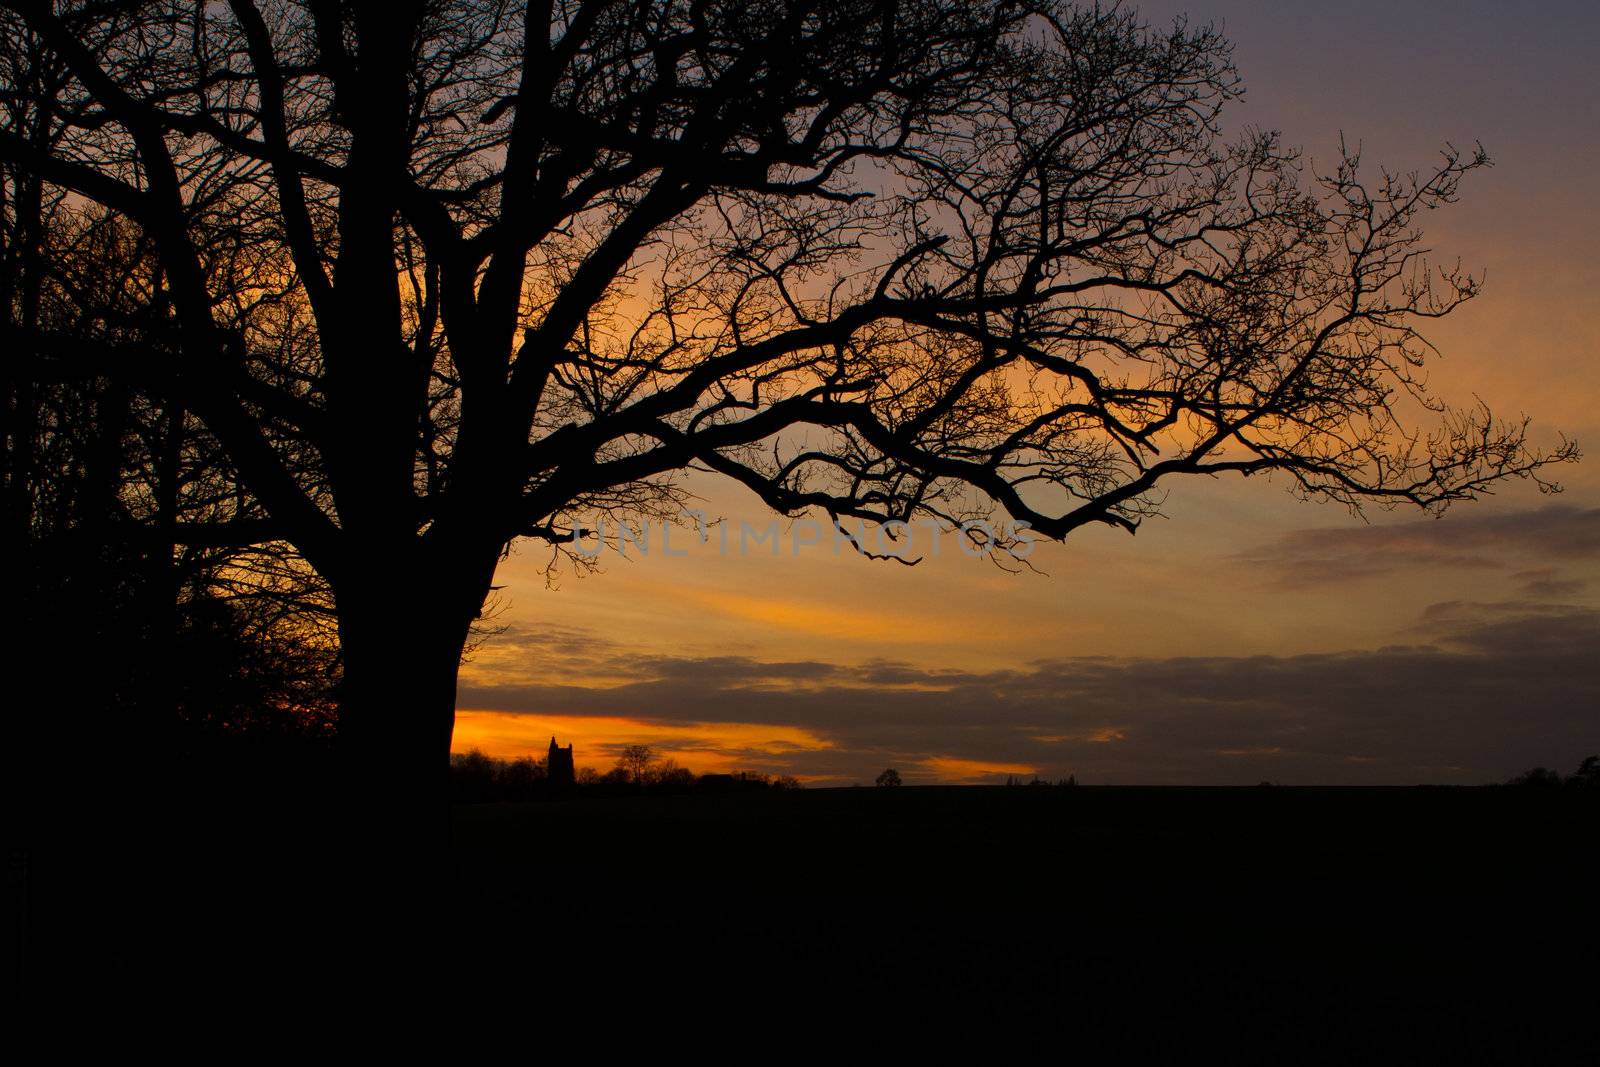 trees in a countryside scene at sunset